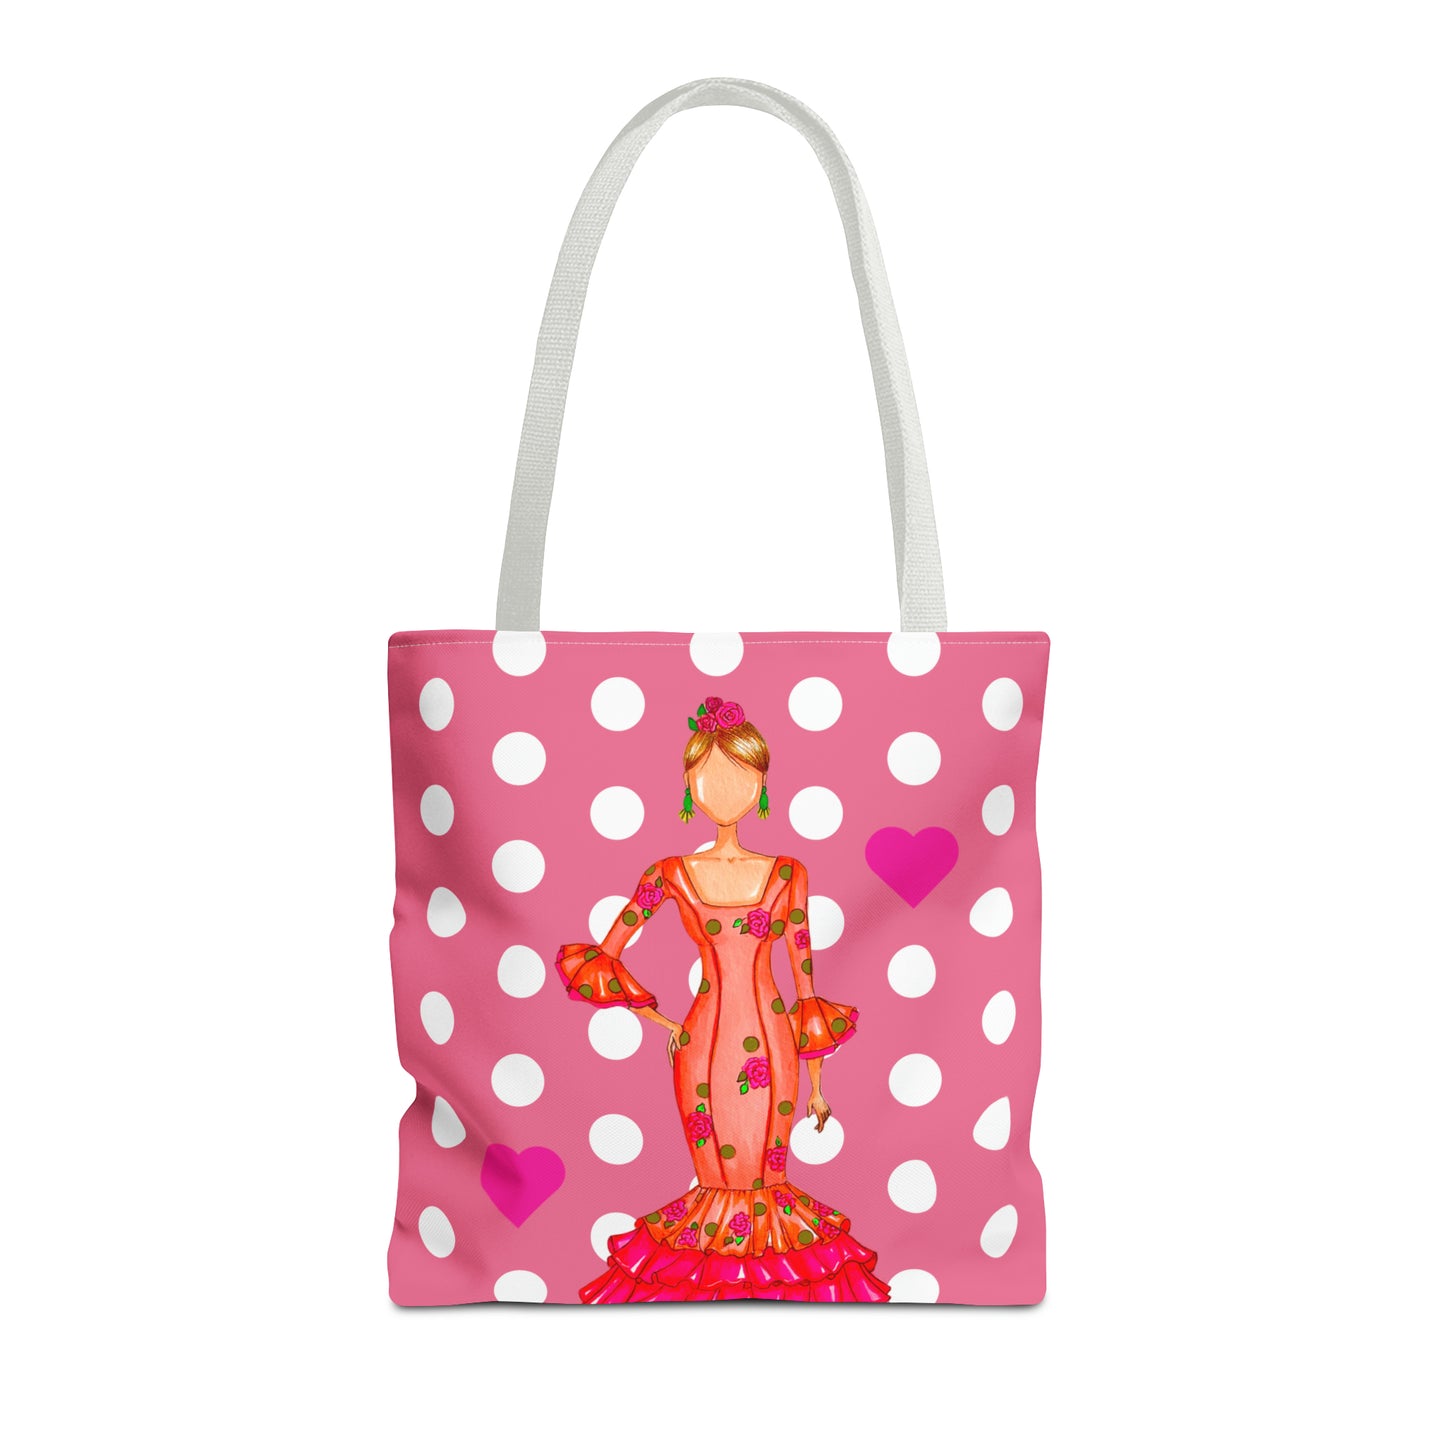 a pink and white polka dot bag with a woman in a red dress